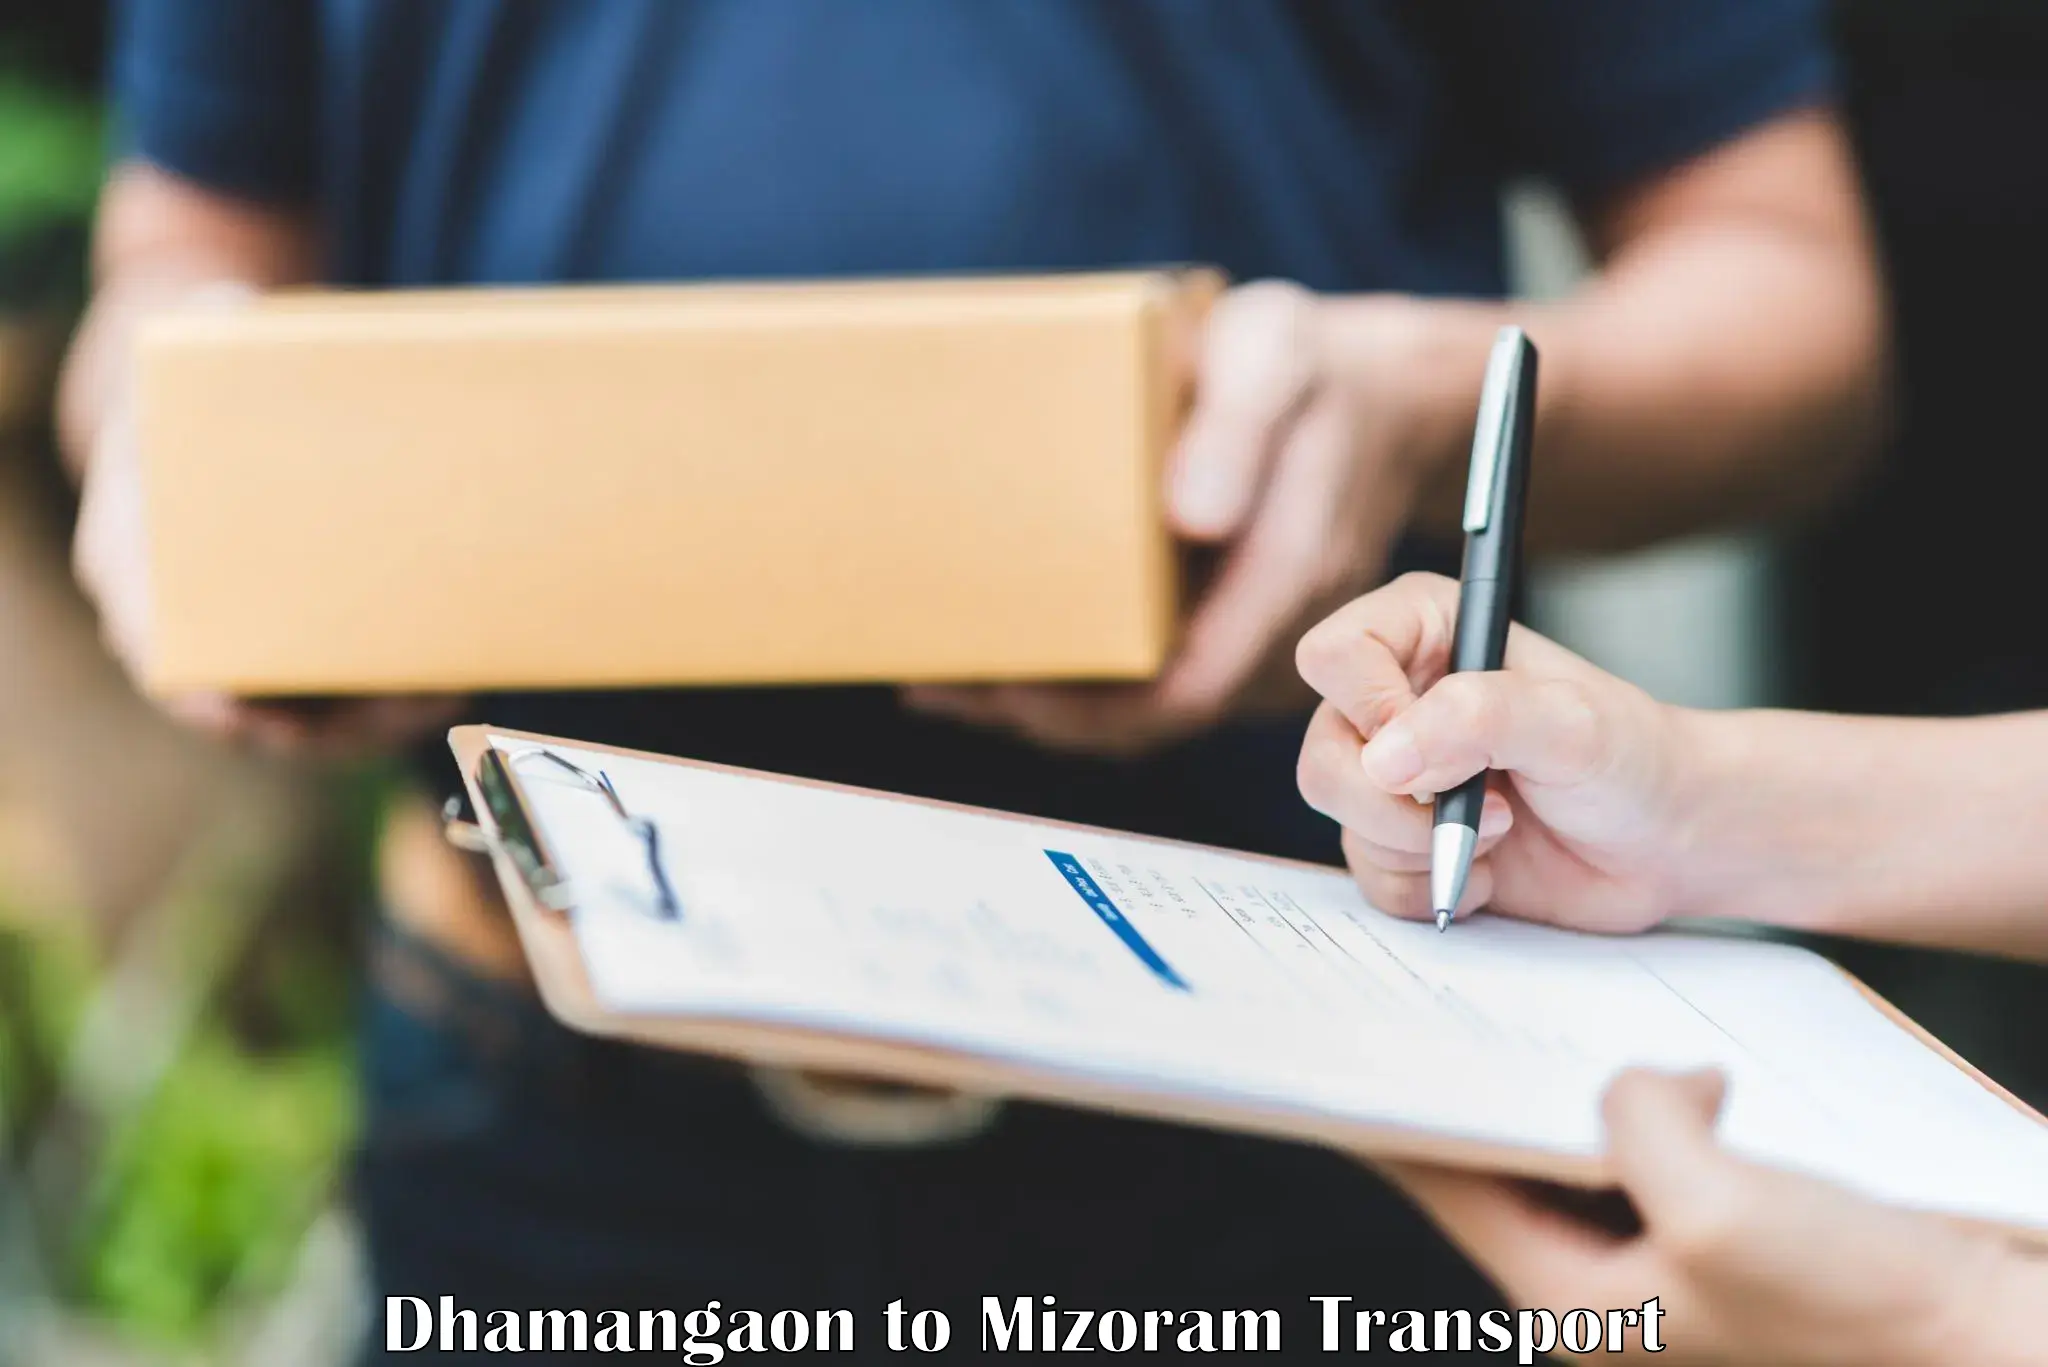 Transport bike from one state to another Dhamangaon to Mizoram